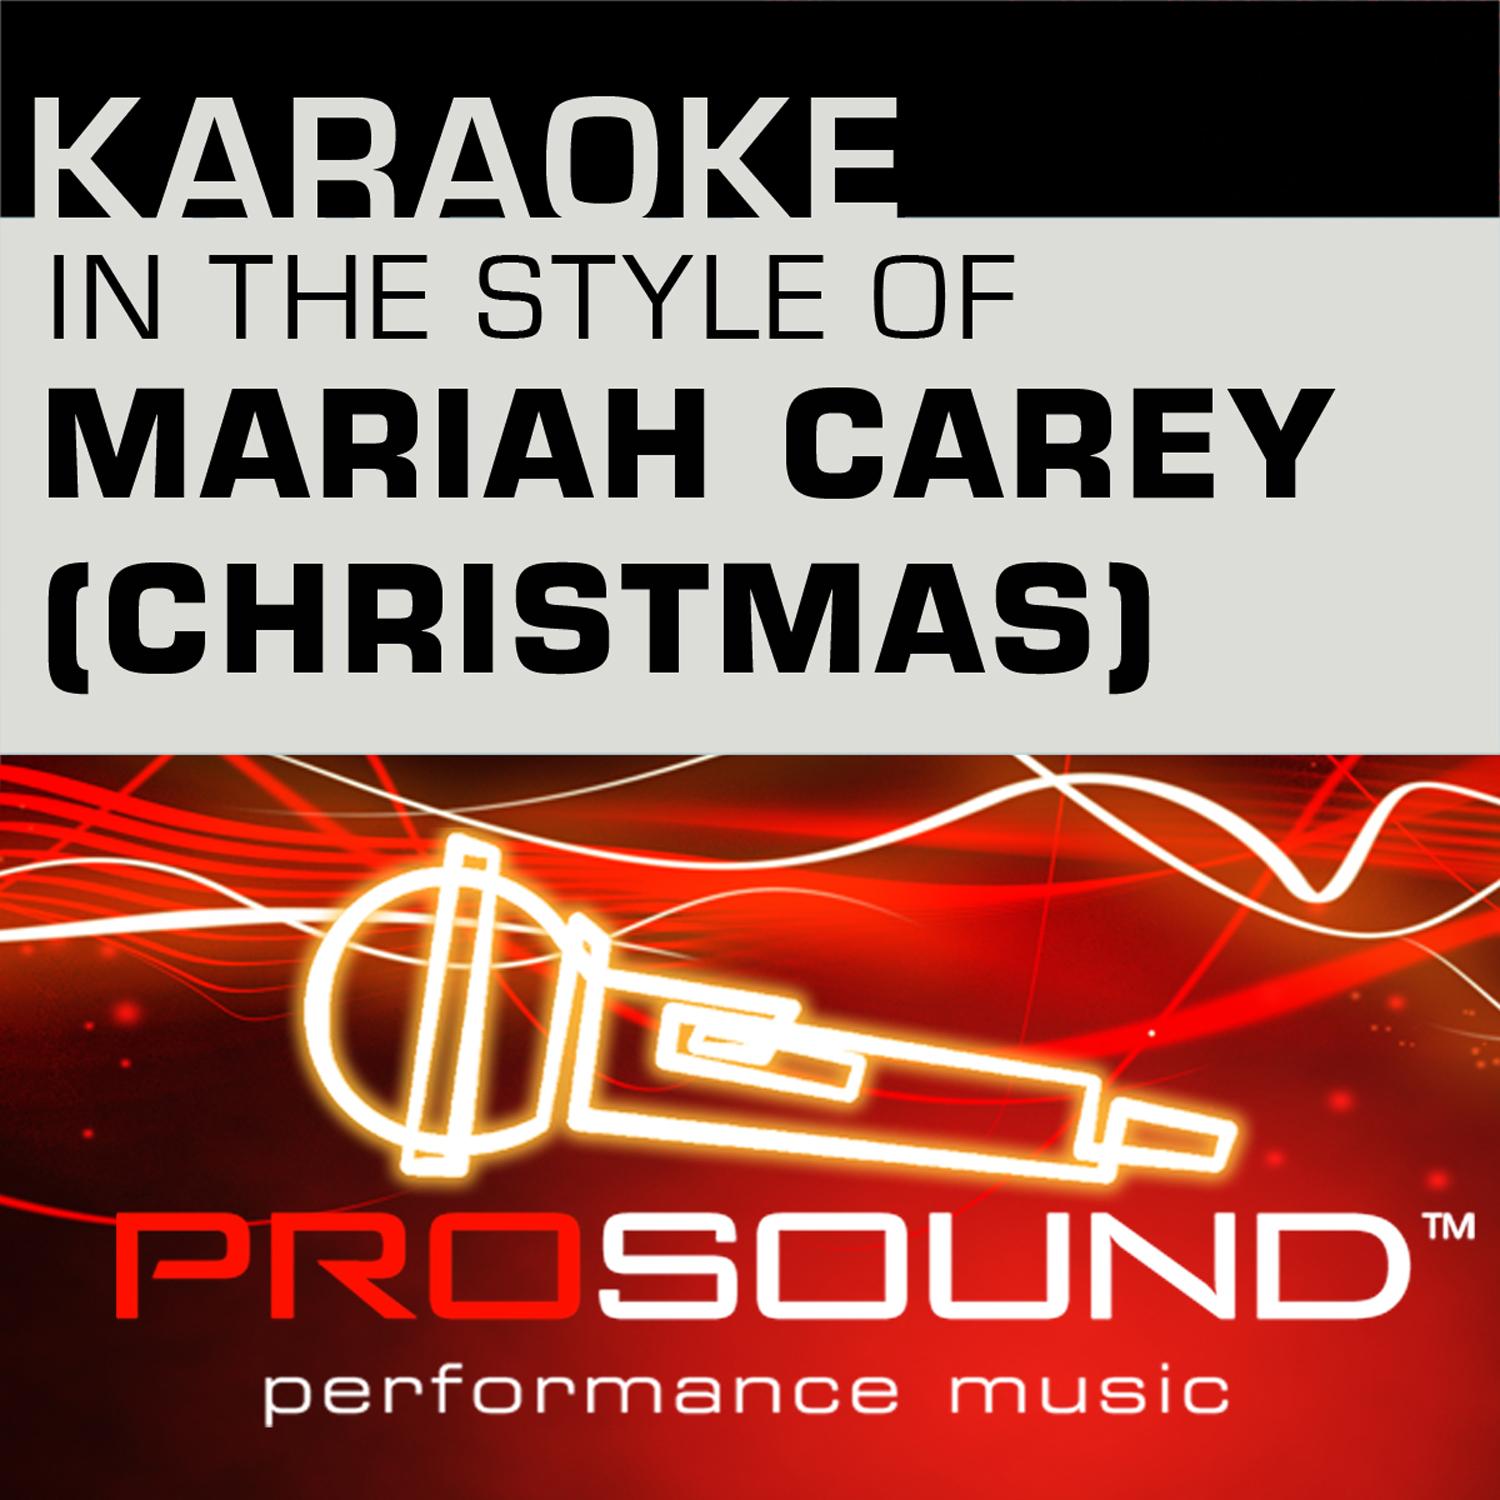 All I Want For Christmas Is You (Karaoke Lead Vocal Demo)[In the style of Mariah Carey]